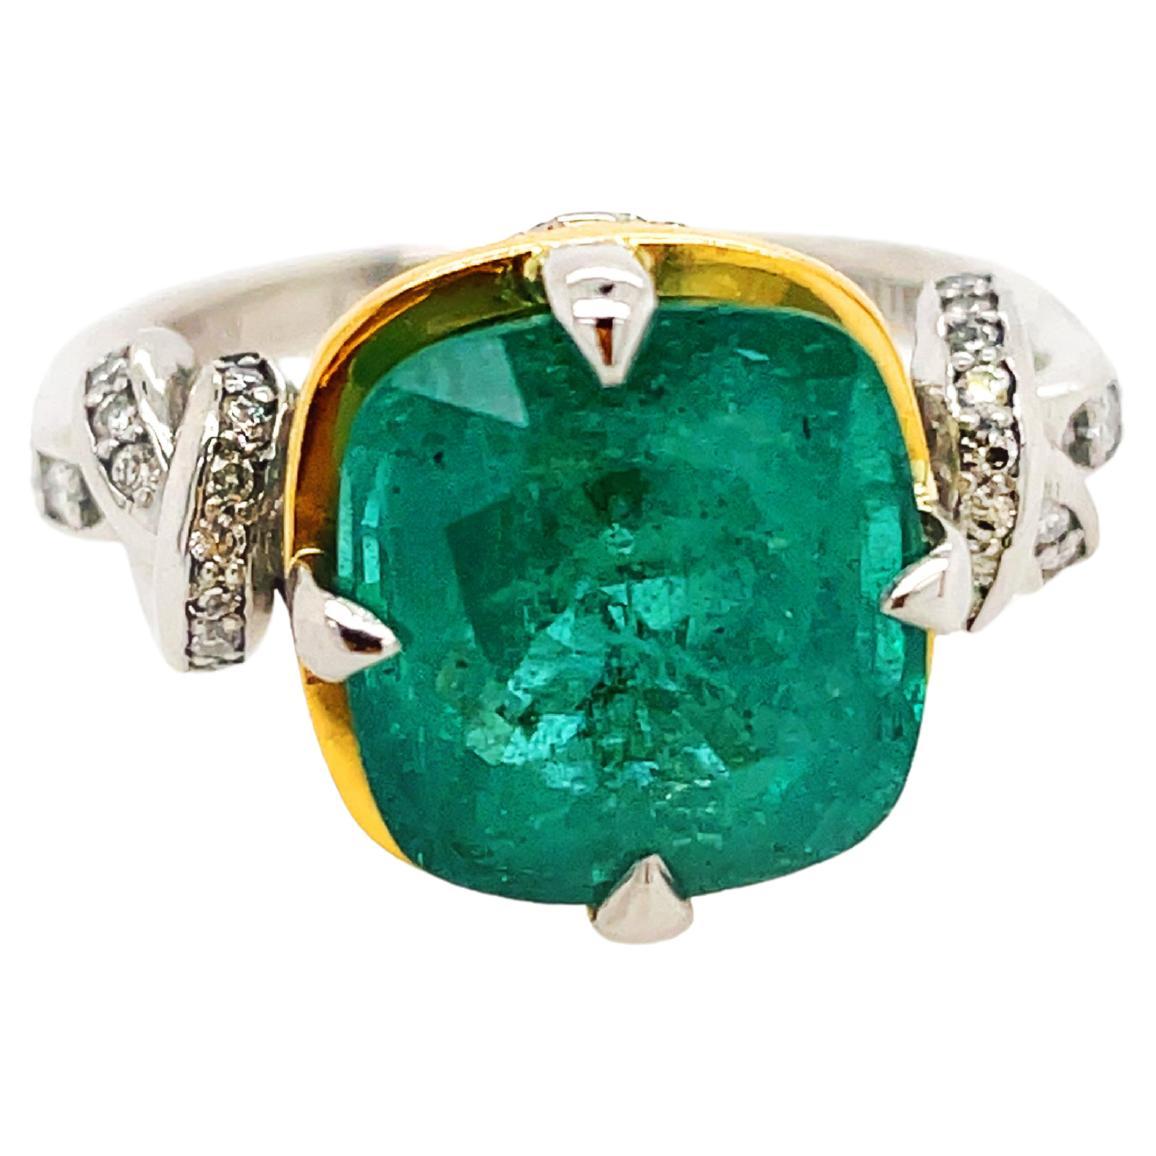 For Sale:  4.96ct Natural Cushion Cut Emerald and Diamond Ring in platinum and 22k gold